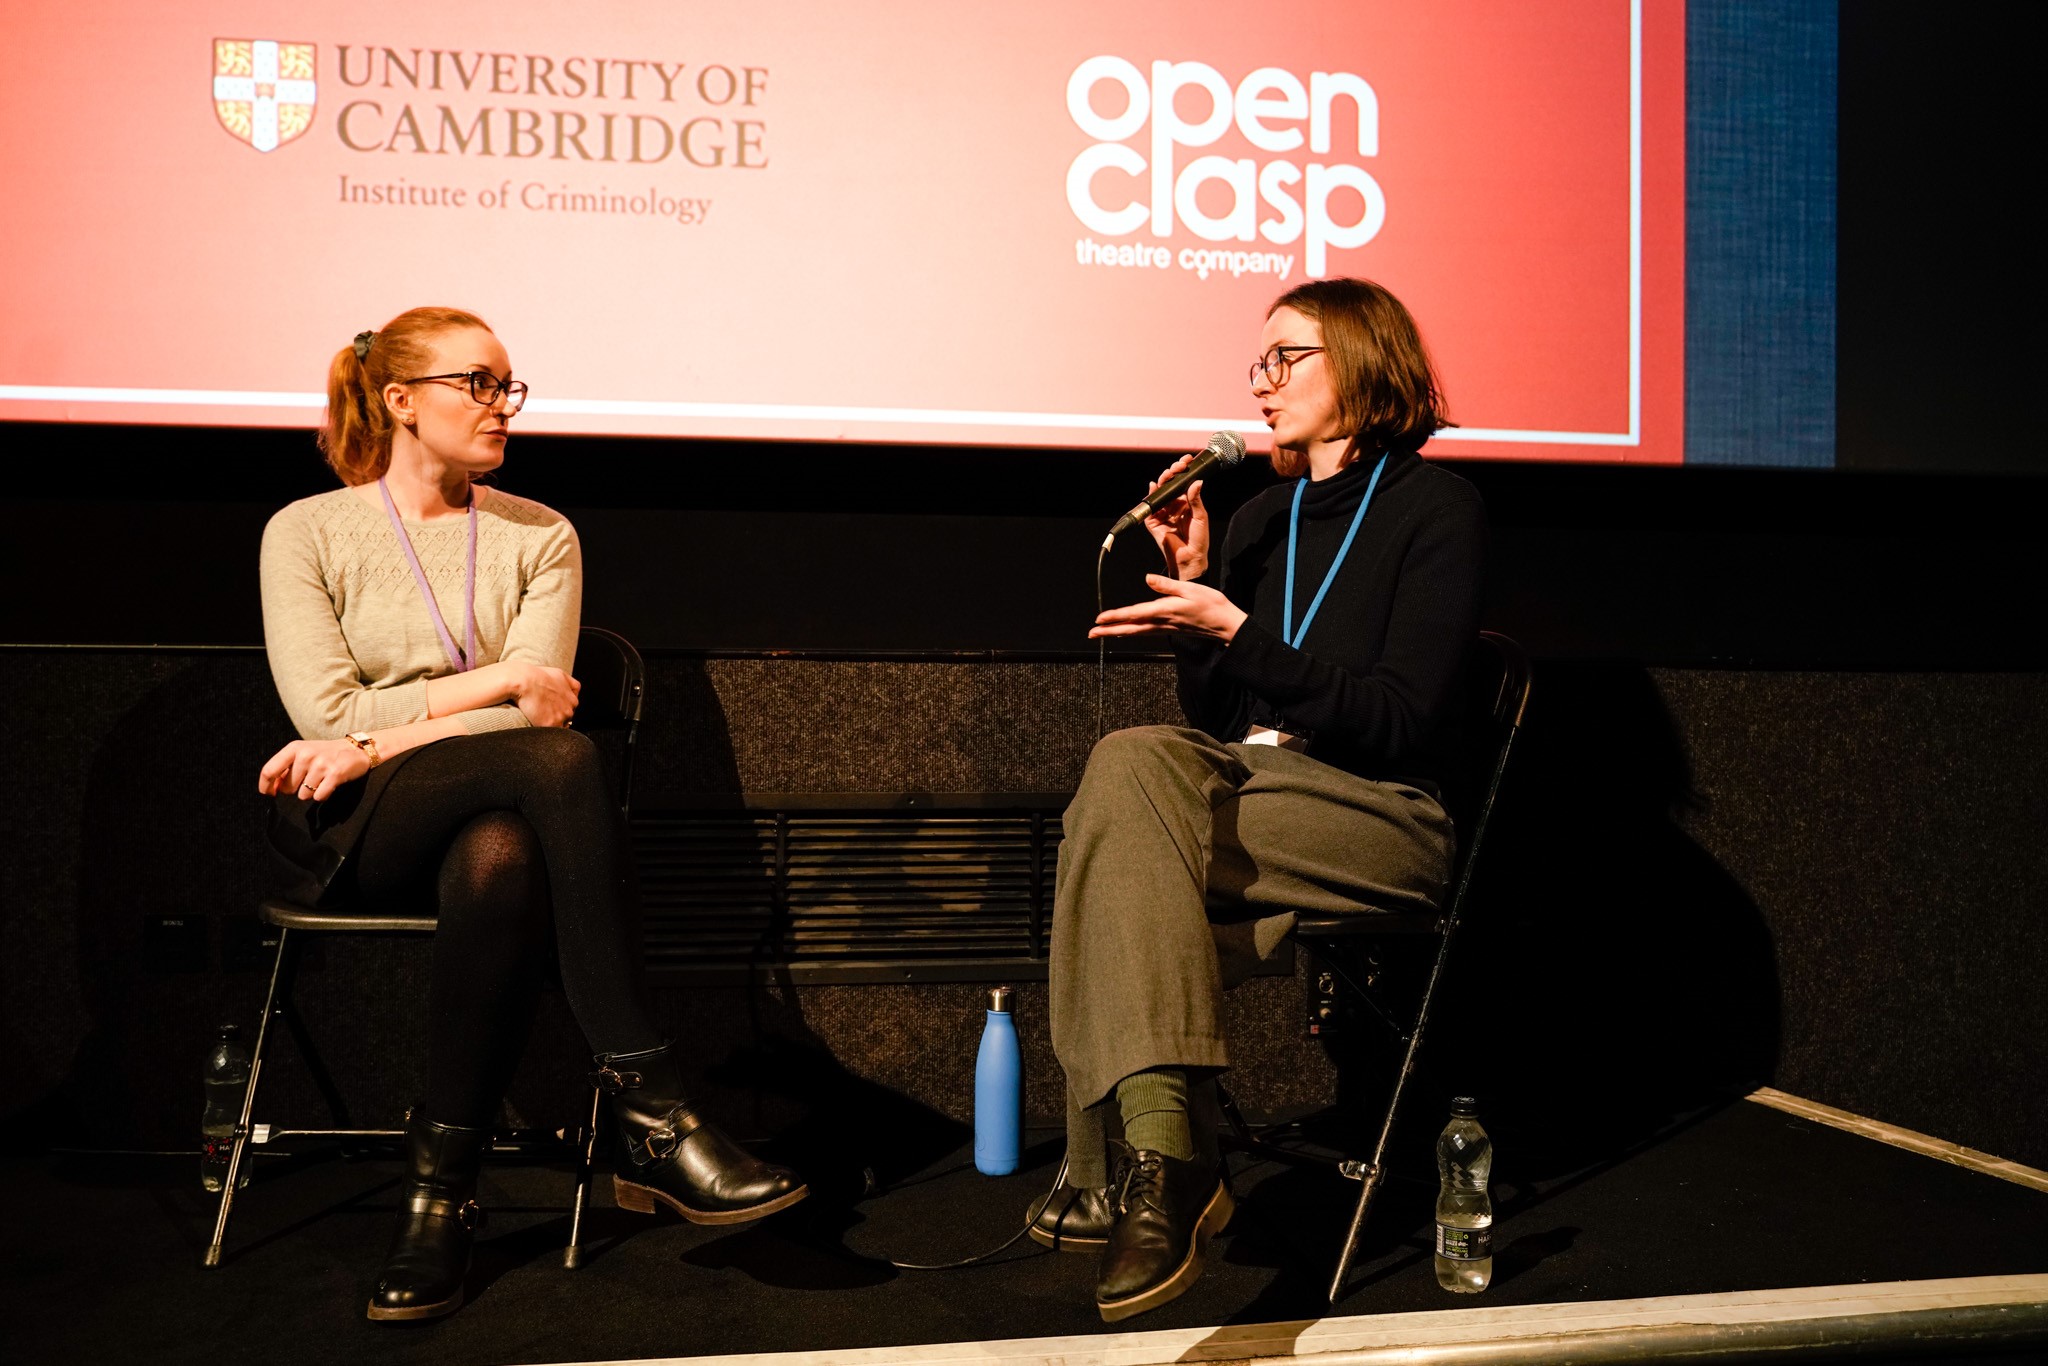 Clean Break Producer Maya Ellis is shown speaking into a microphone on stage with Open Clasp Senior Producer Carly McConnelly